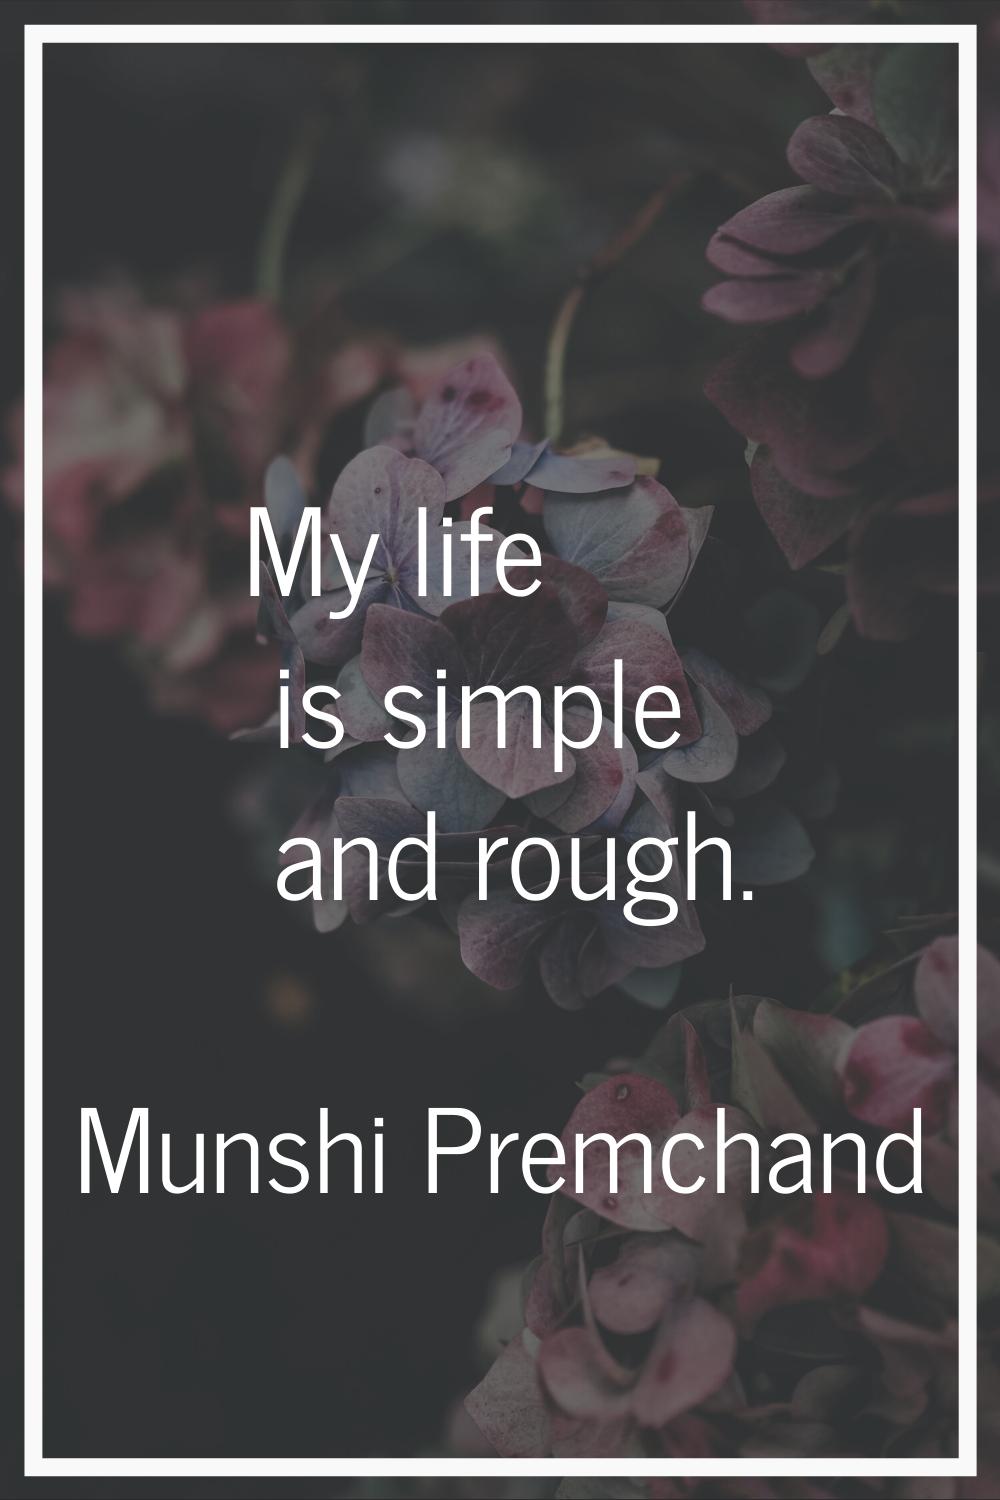 My life is simple and rough.